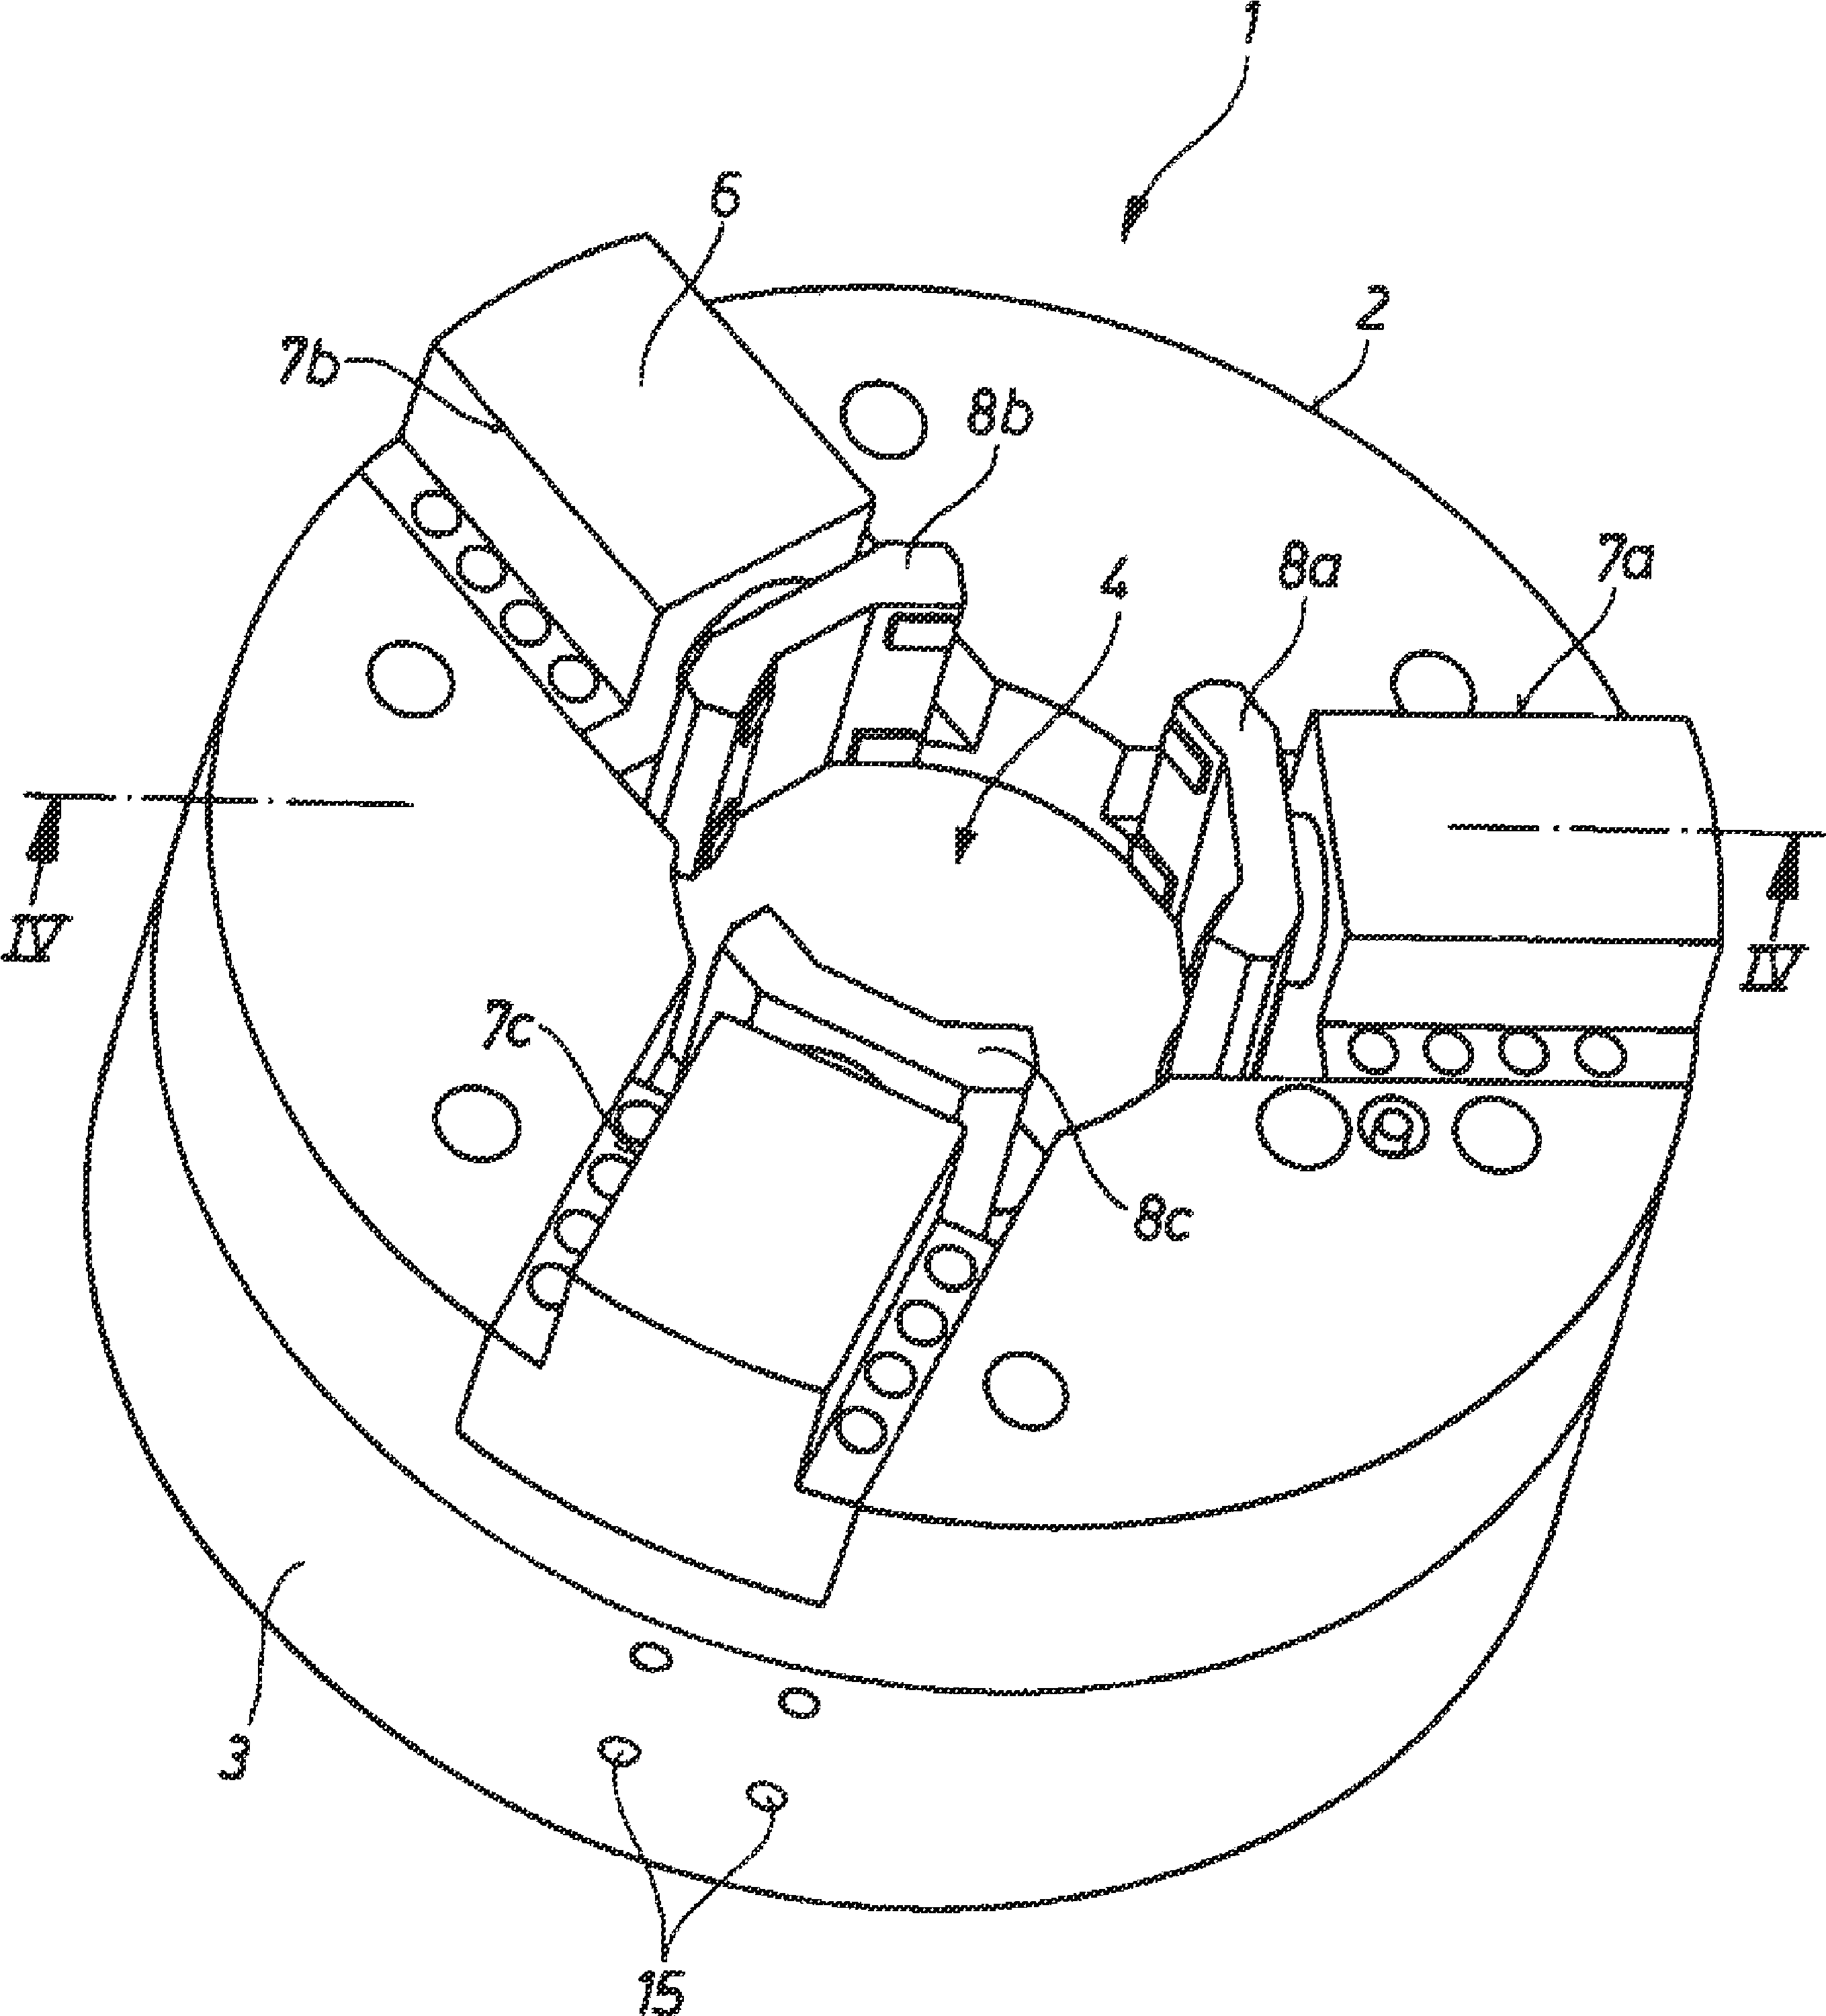 Chuck for a machine tool for machining a tubular, rotating workpiece